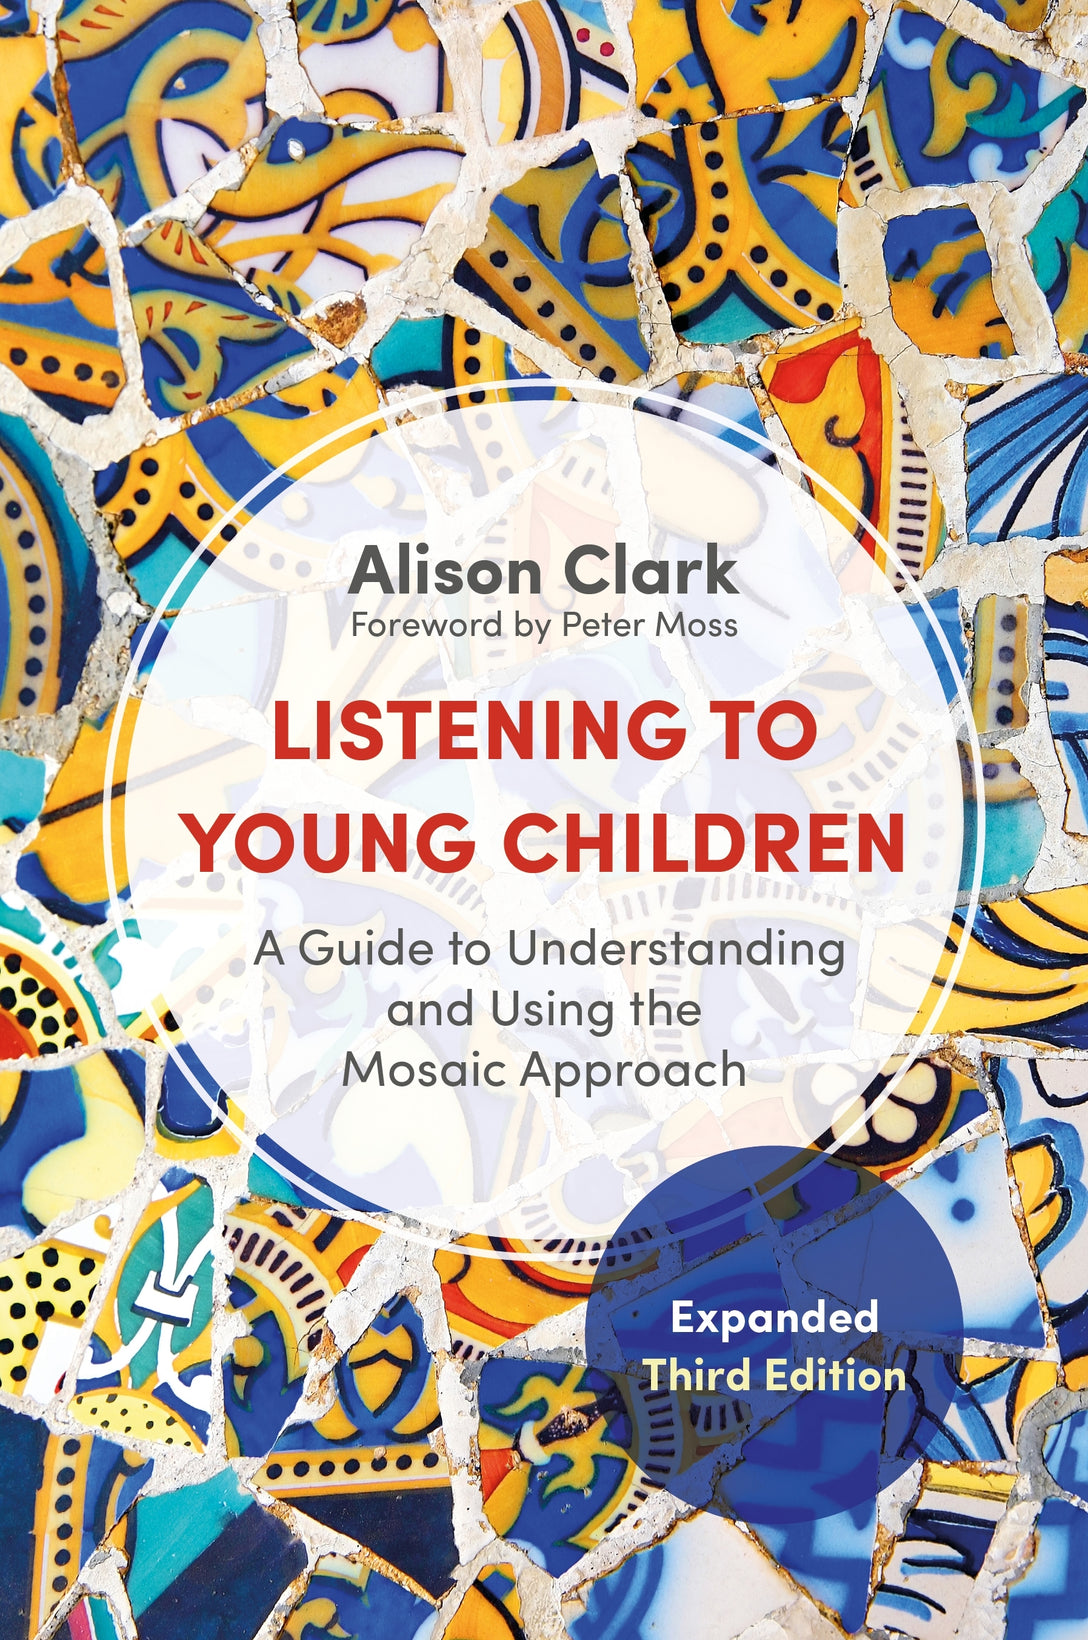 Listening to Young Children, Expanded Third Edition by Alison Clark, Peter Moss